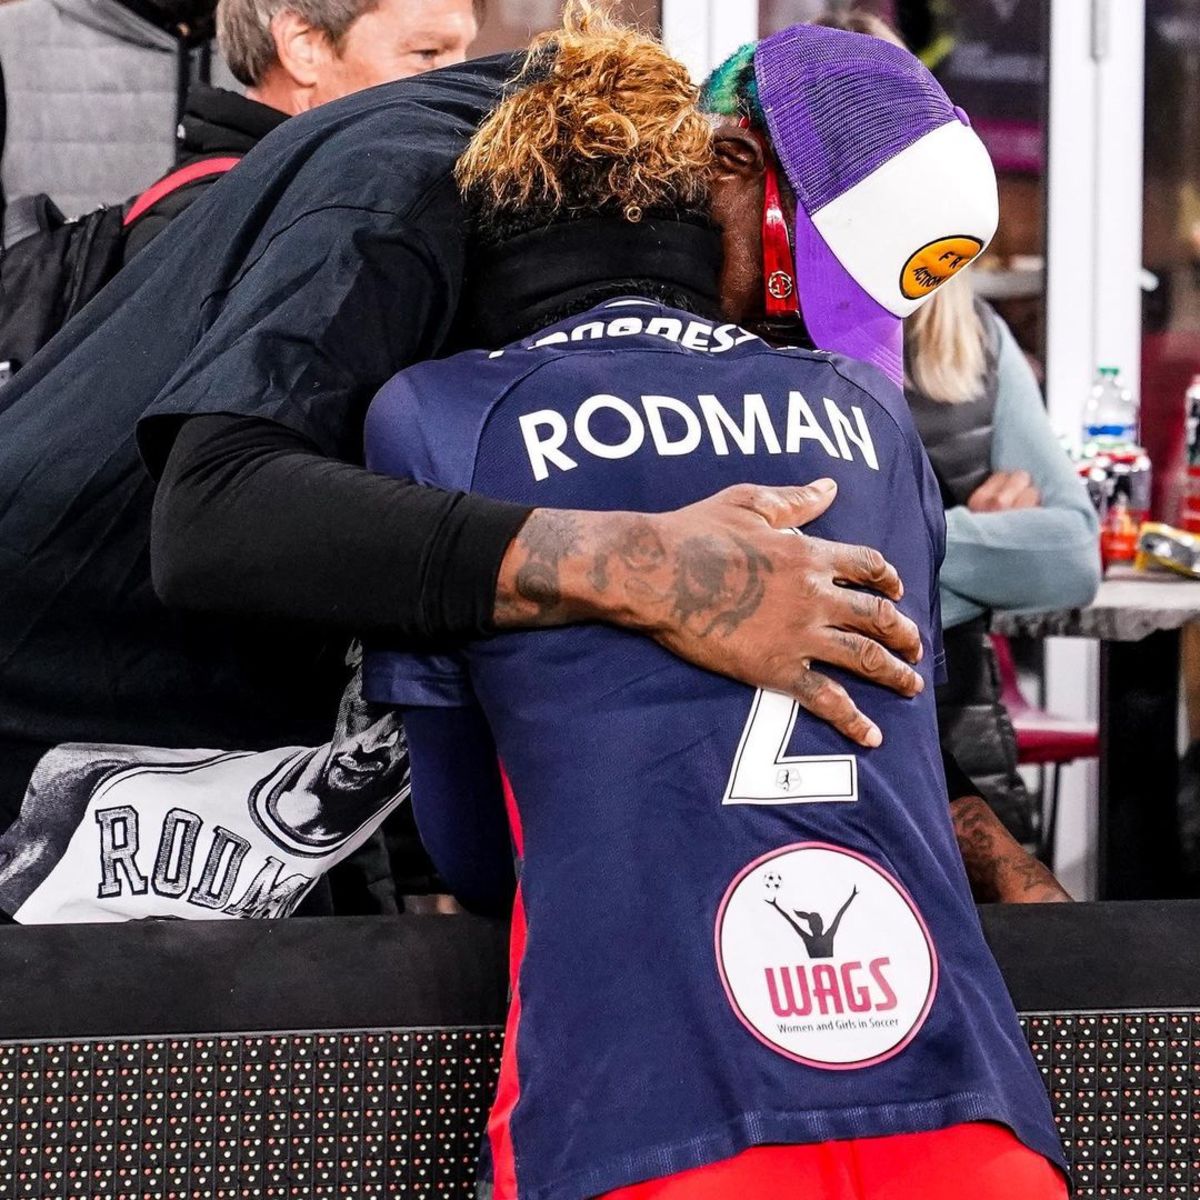 Dennis Rodman's Daughter Trinity Rodman Gets Called Up By The US Women's Soccer Team